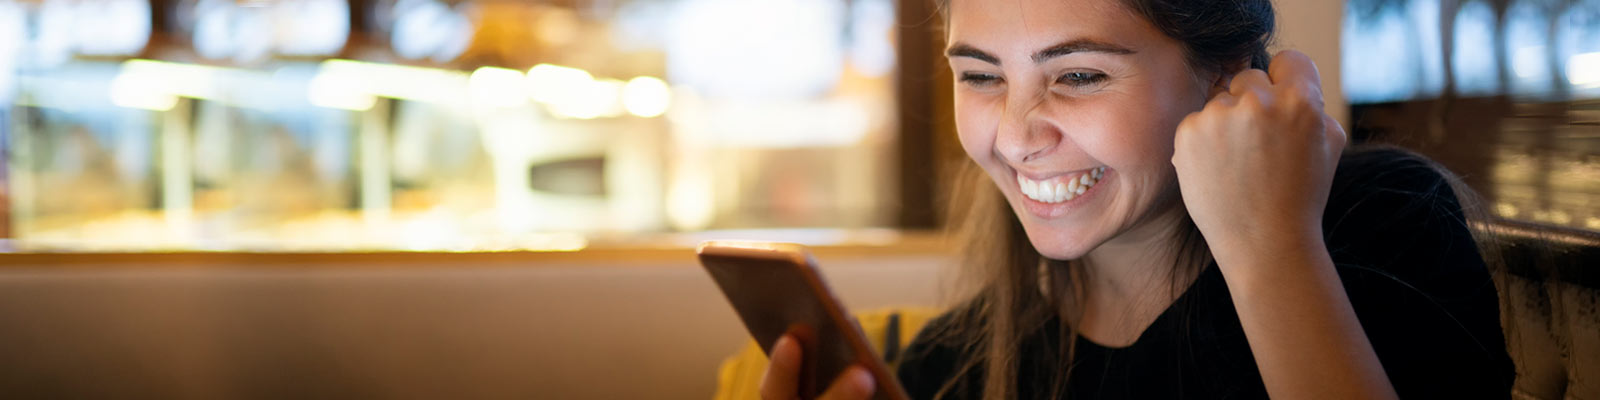 Woman looking at phone, smiling and pumping fist